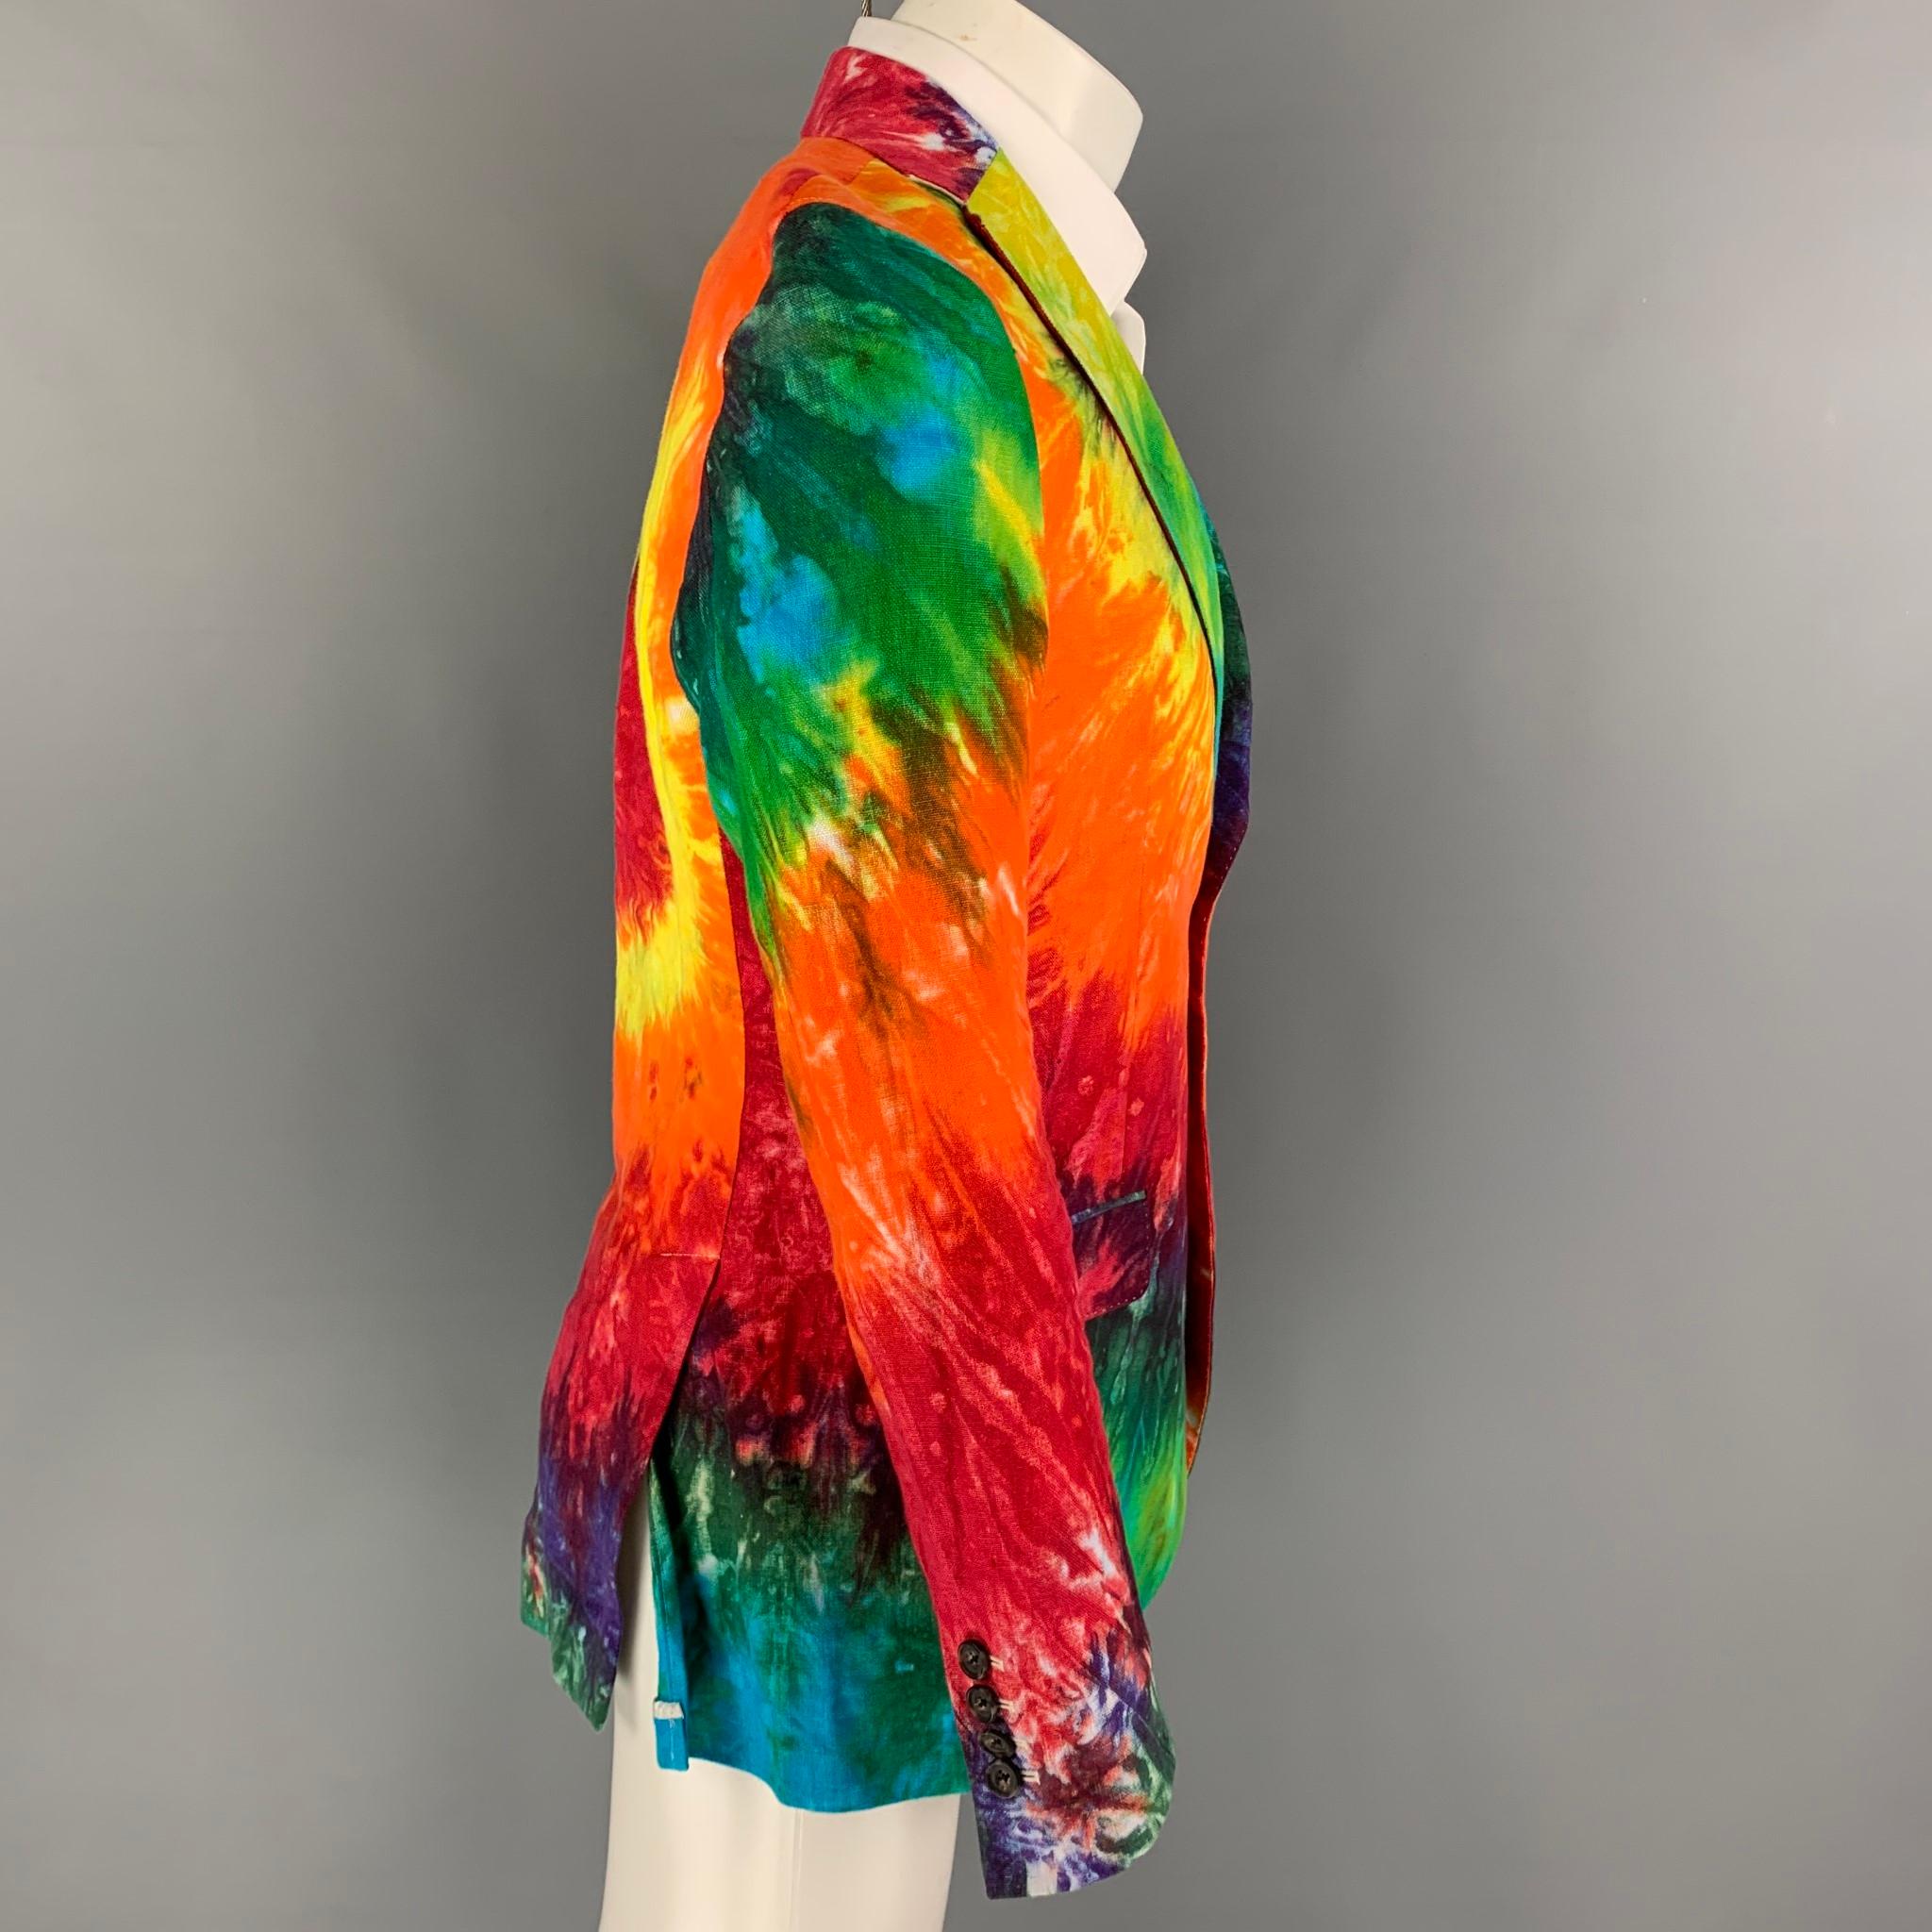 R13 Spring-Summer 2019 sport coat comes in a multi-color tie dye linen featuring a notch lapel, flap pockets, double back vent, and a double button closure. Made in USA. 

Excellent Pre-Owned Condition.
Marked: M
Original Retail Price: